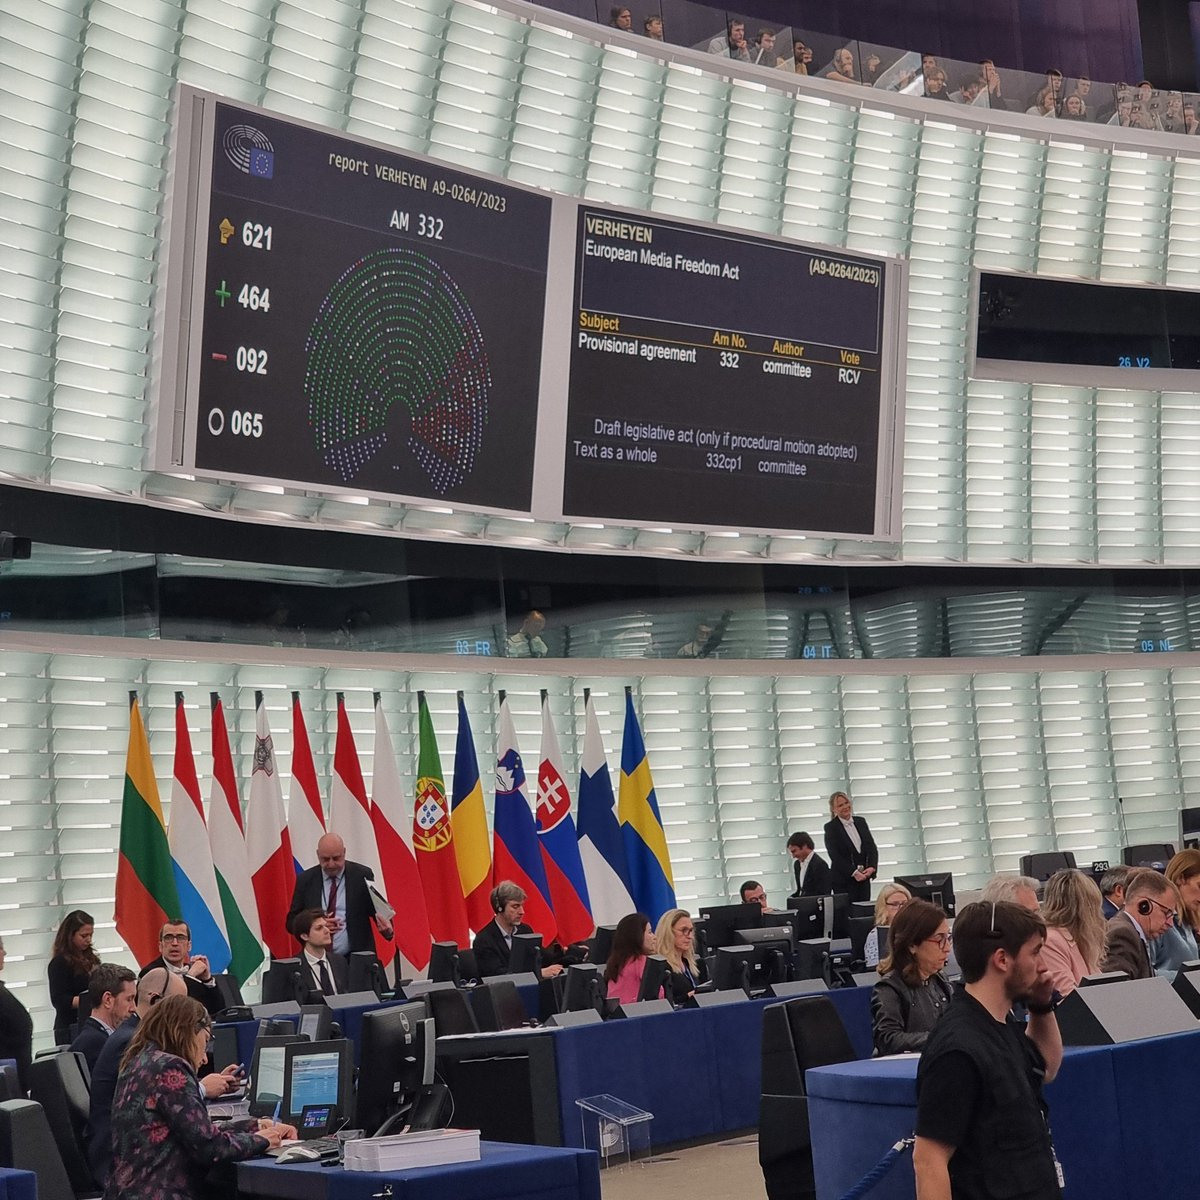 The European Parliament has voted in favour of the provisional agreement on the #EuropeanMediaFreedomAct : ➕ 464 in favour ➖ 92 against ⚪️ 65 abstentions 👉 Final adoption soon! #EMFA